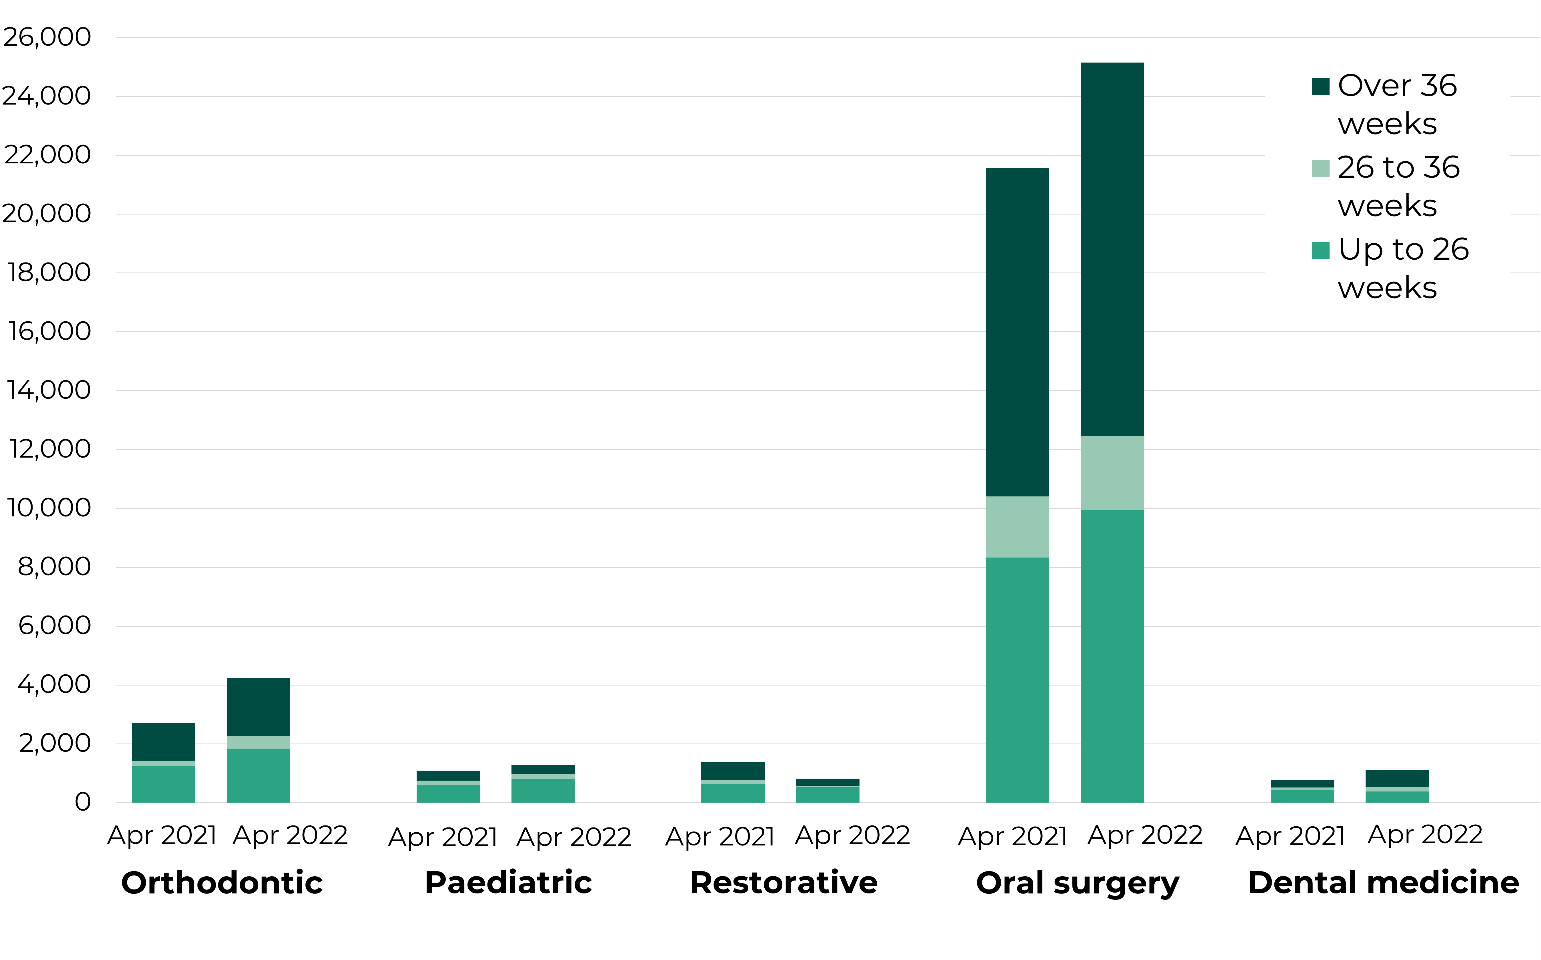 Content of this graph is explained in the text. There were more people waiting for orthodonic treatment (4,236) than paediatric dentistry (1,287) or restorative dentistry (823) in April 2022.